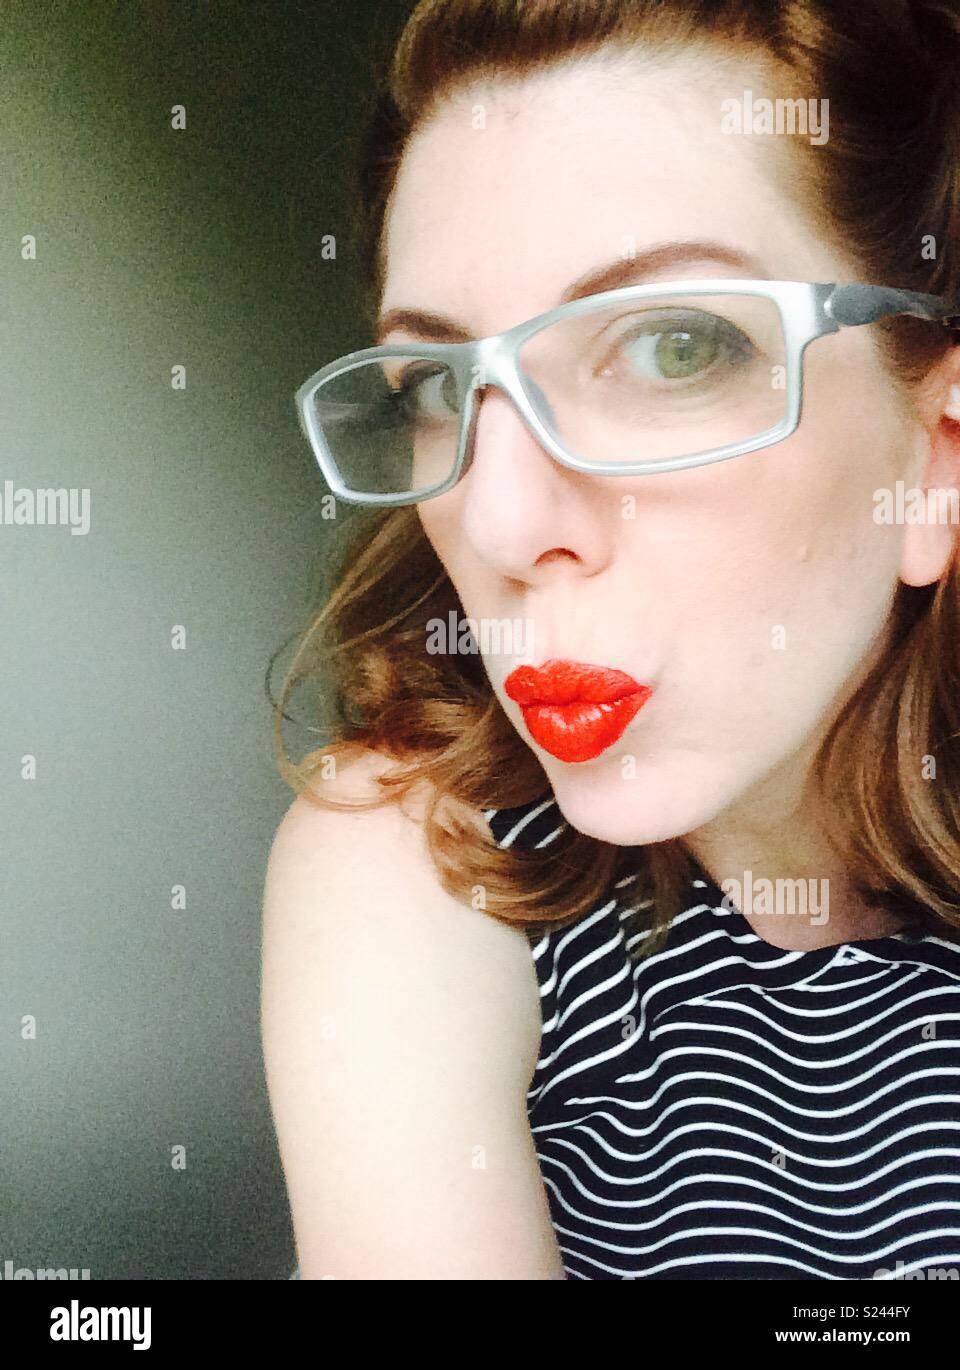 Woman with silver glasses and red puckered lips Stock Photo